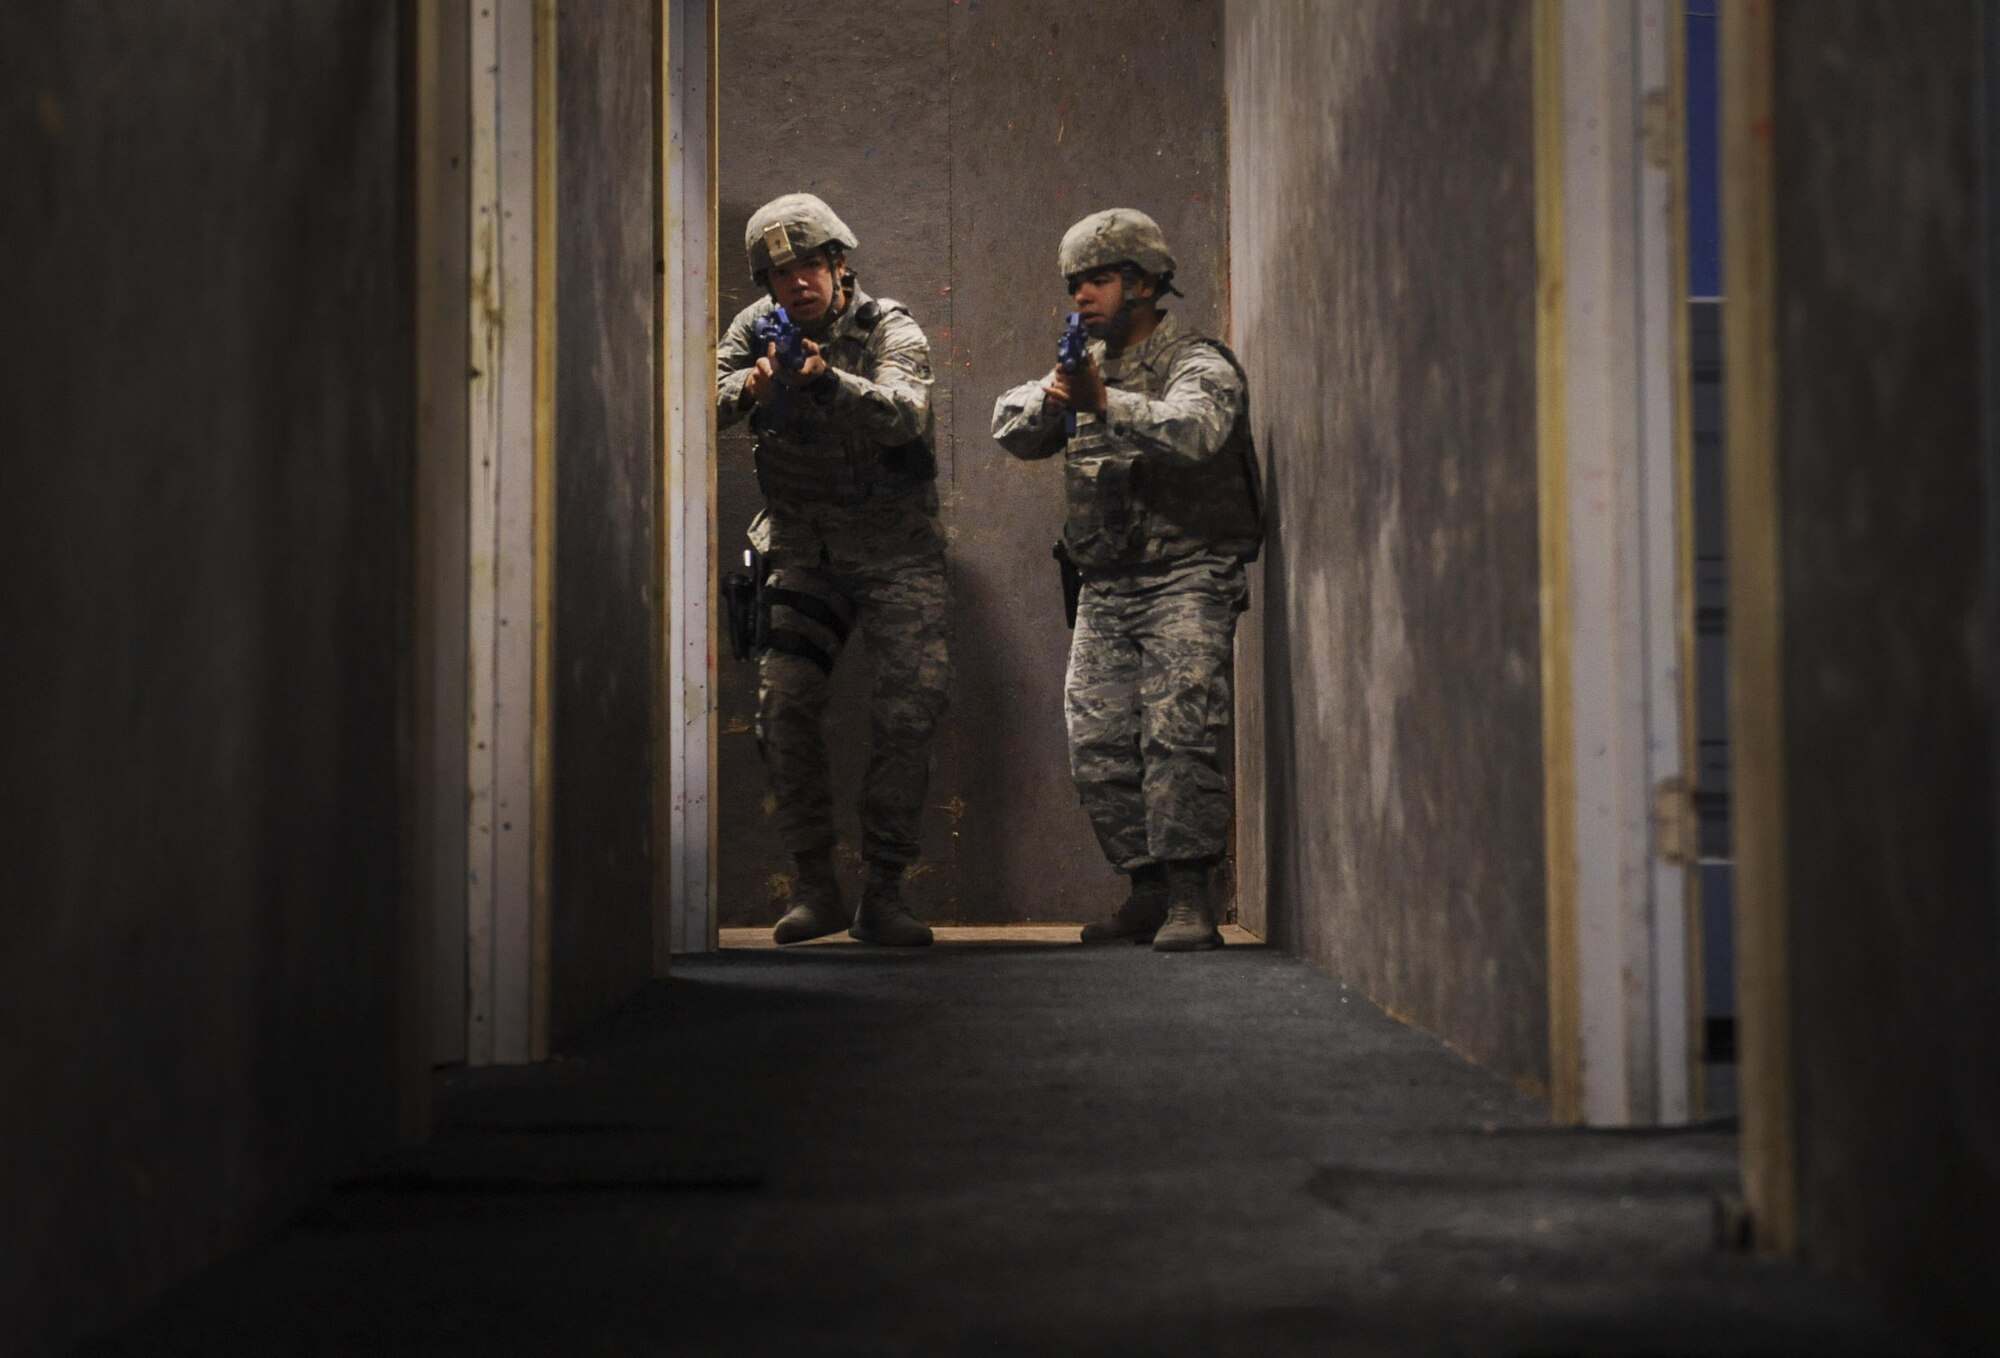 Senior Airman Jesus Guerrero and Airman 1st Class Emilio Rodriguez, 99th Security Forces Squadron members, clear rooms during an active-shooter training scenario in Area II on Nellis Air Force Base, Nev., May 17, 2017. All law enforcement and security response team patrols need to be capable to respond to a variety of emergencies. (U.S. Air Force photo by Senior Airman Kevin Tanenbaum/Released)